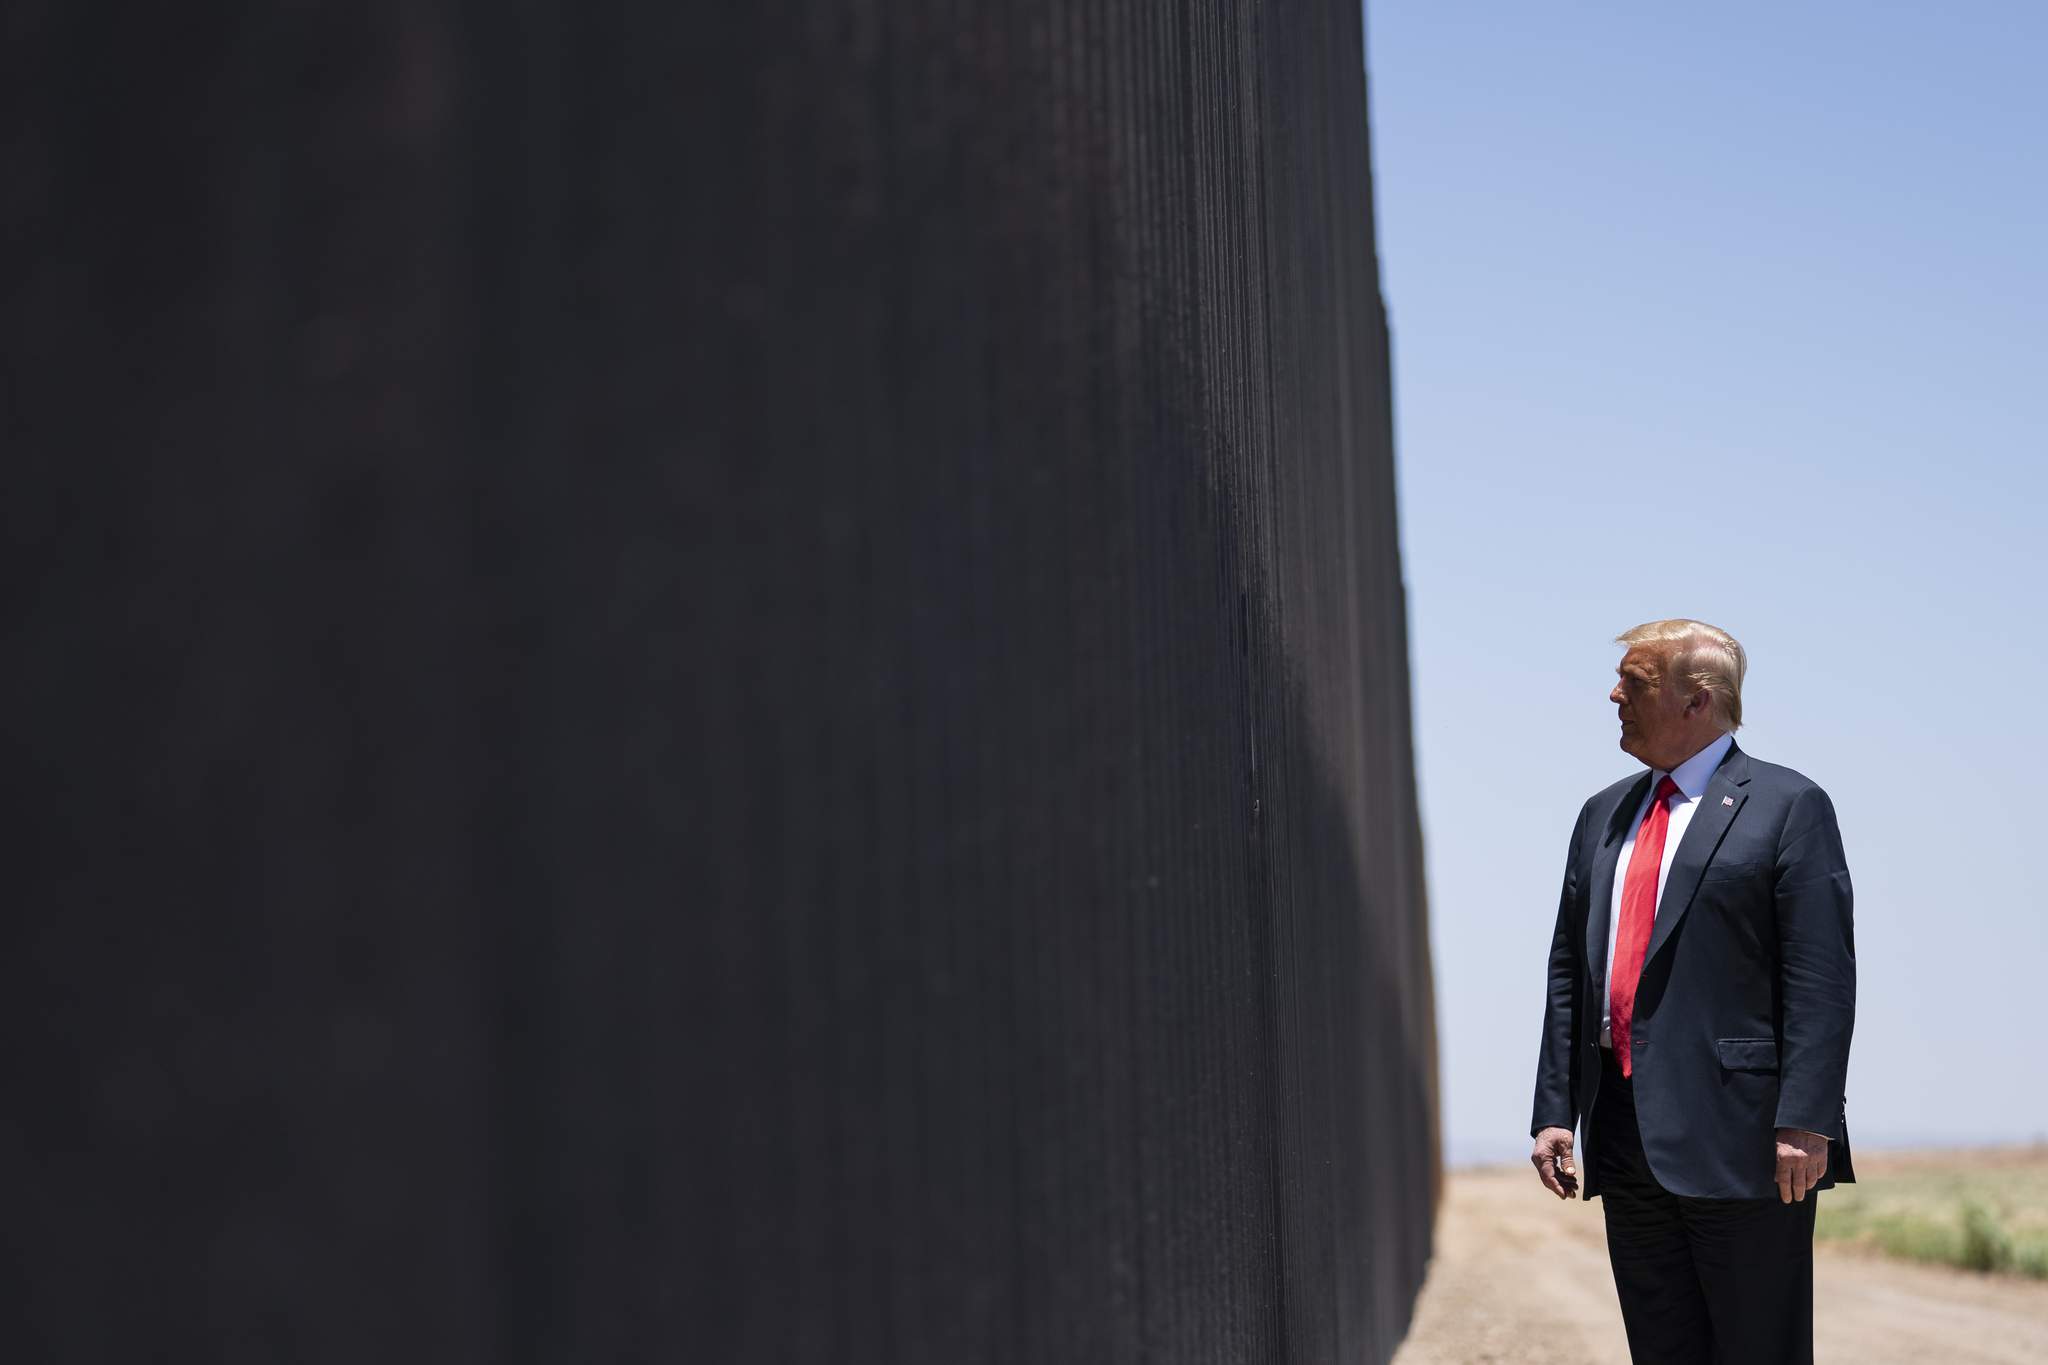 President Donald Trump’s relationship with the Texas border